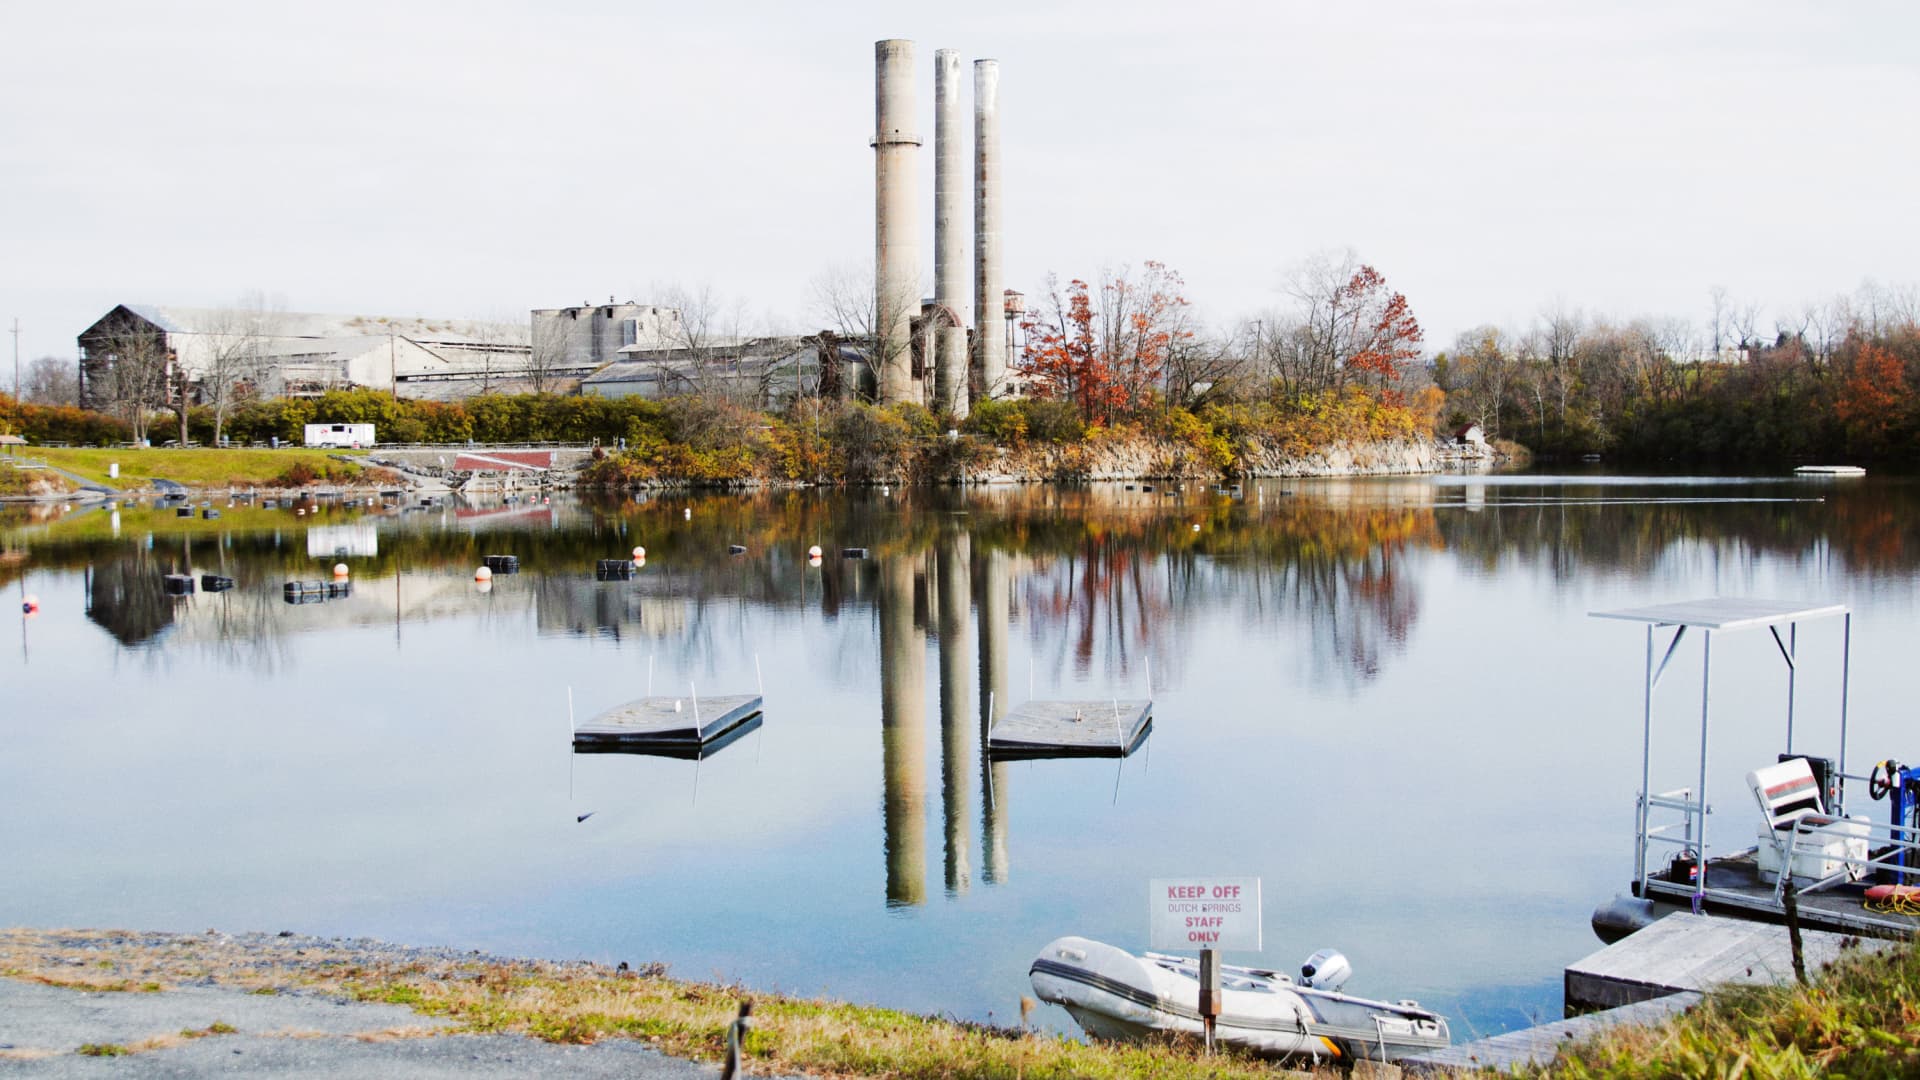 The quarry lake at Dutch Springs, a scuba diving center and aqua park in the Lehigh Valley, Pennsylvania.